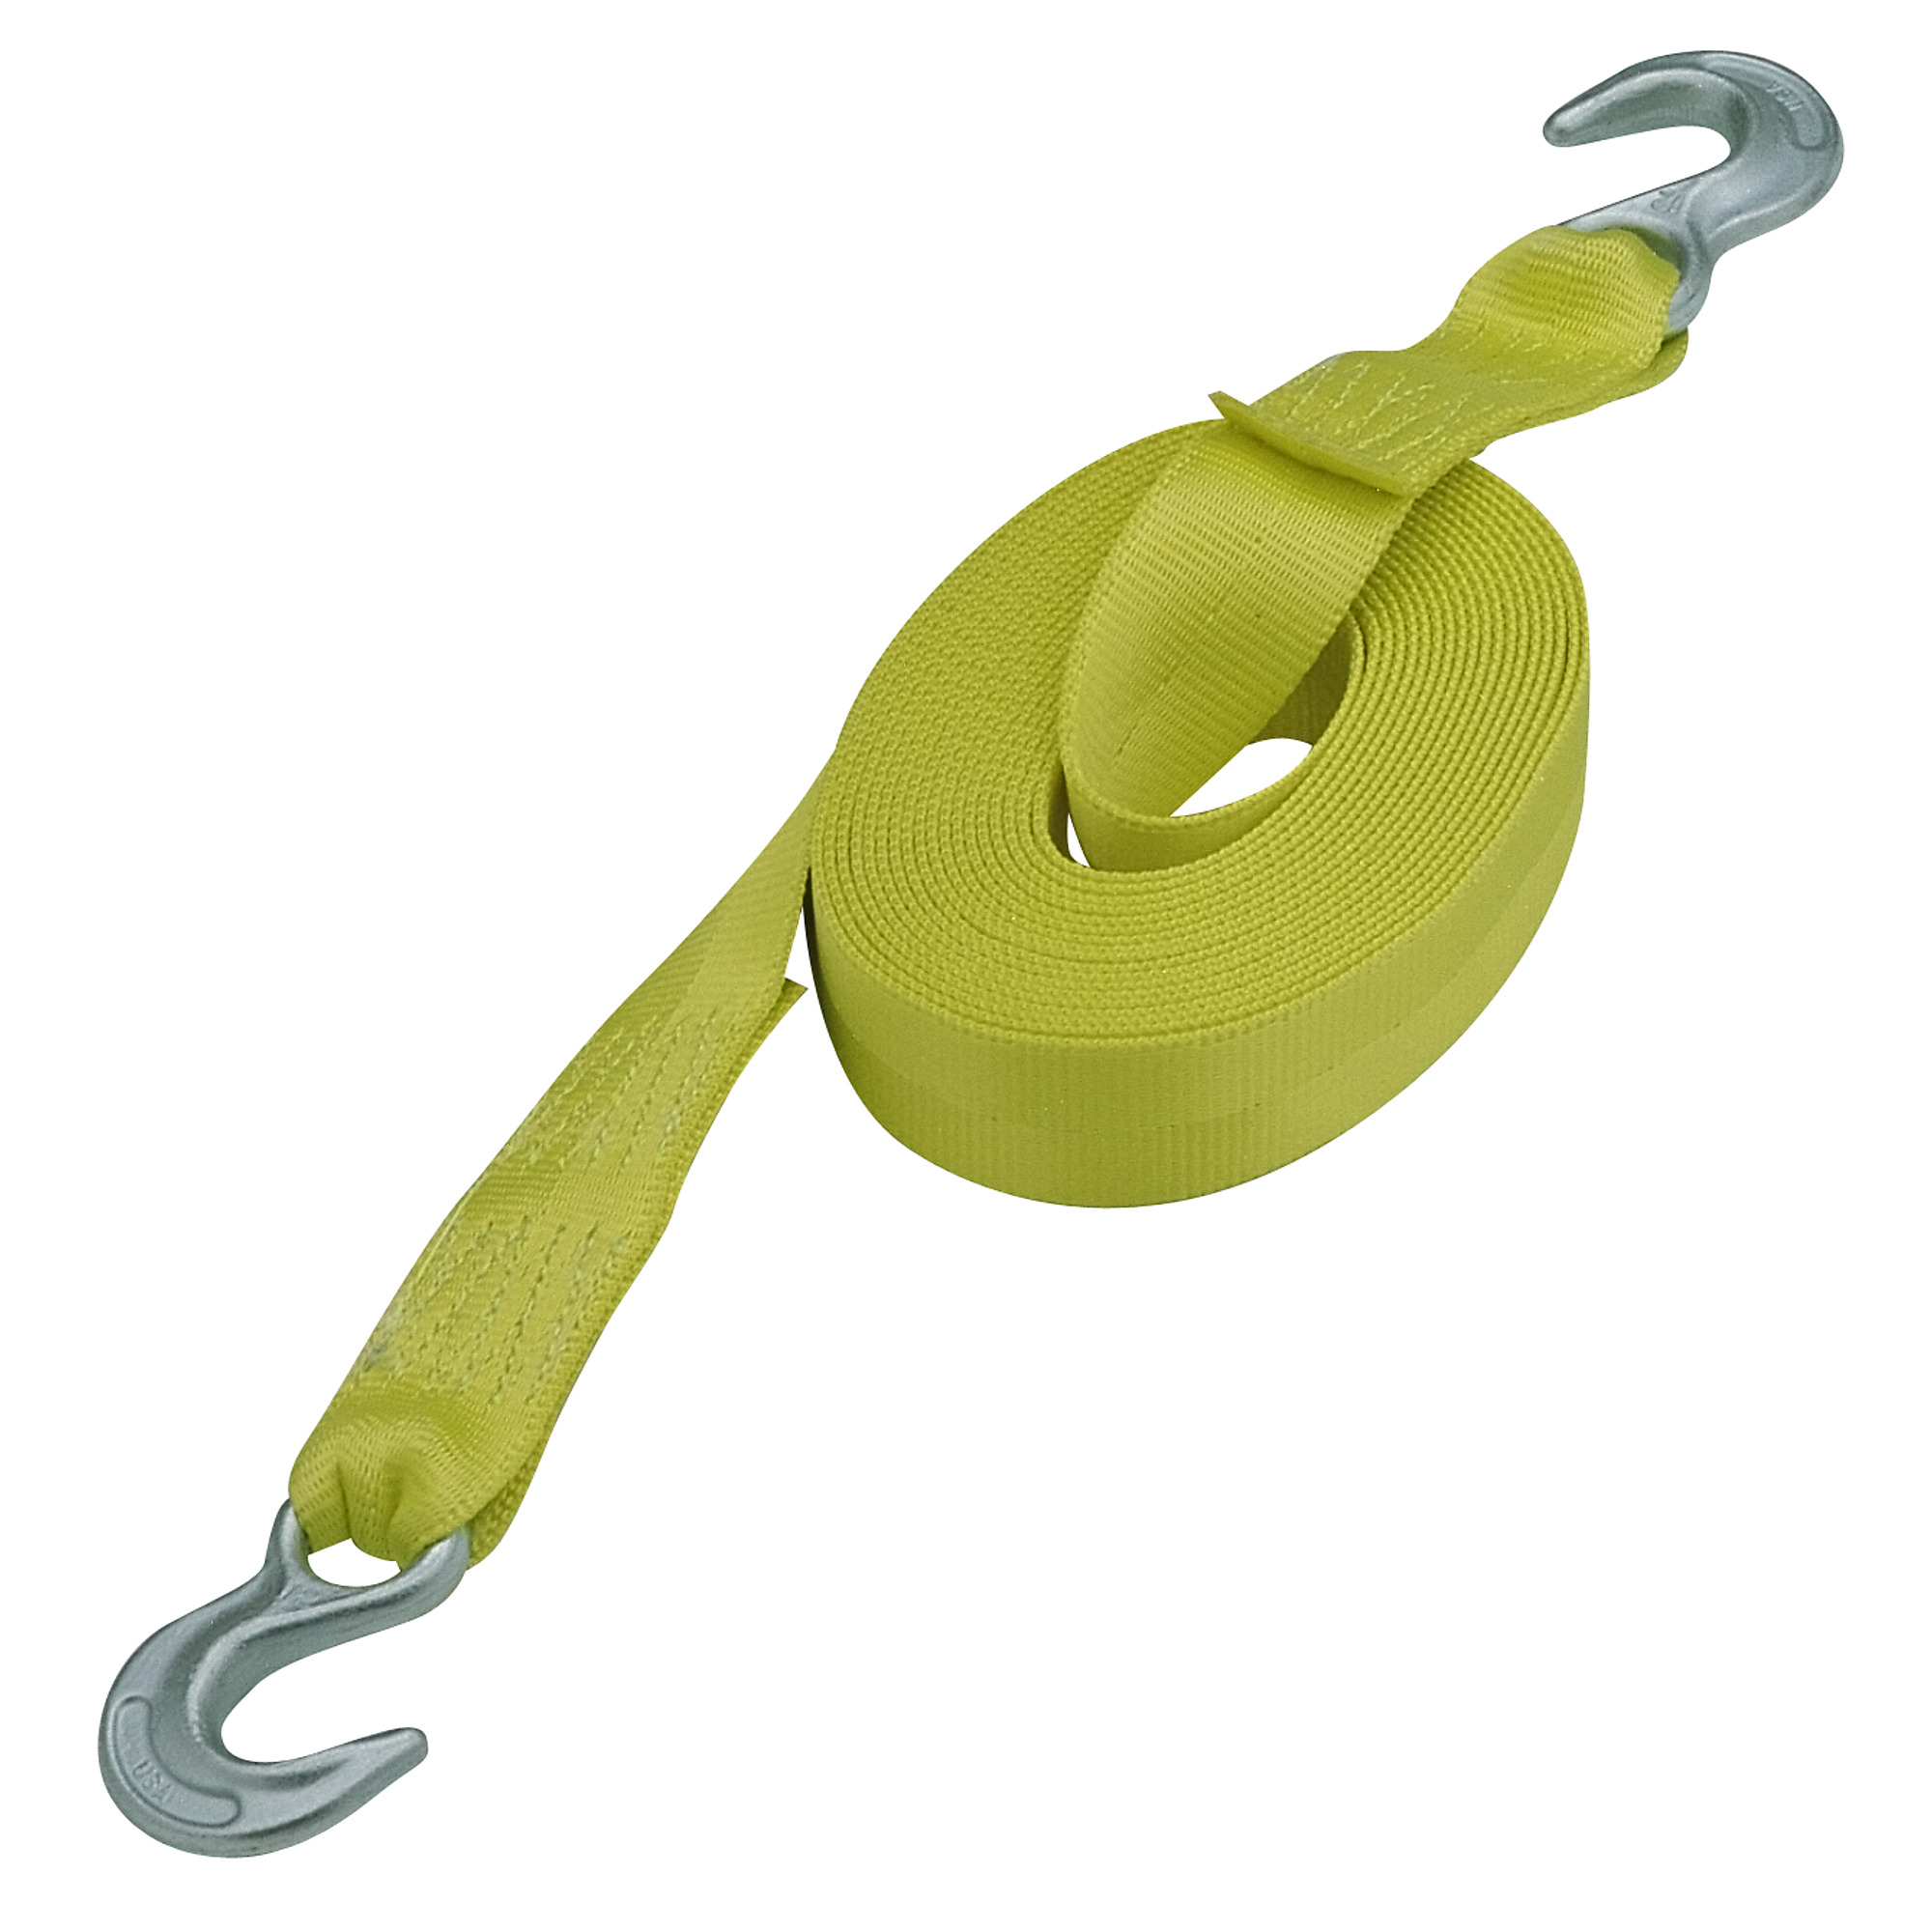 American Power Pull, 15ft. Tow Strap, Working Load 10000 lb, Length 180 in, Material Polyester, Model 16000